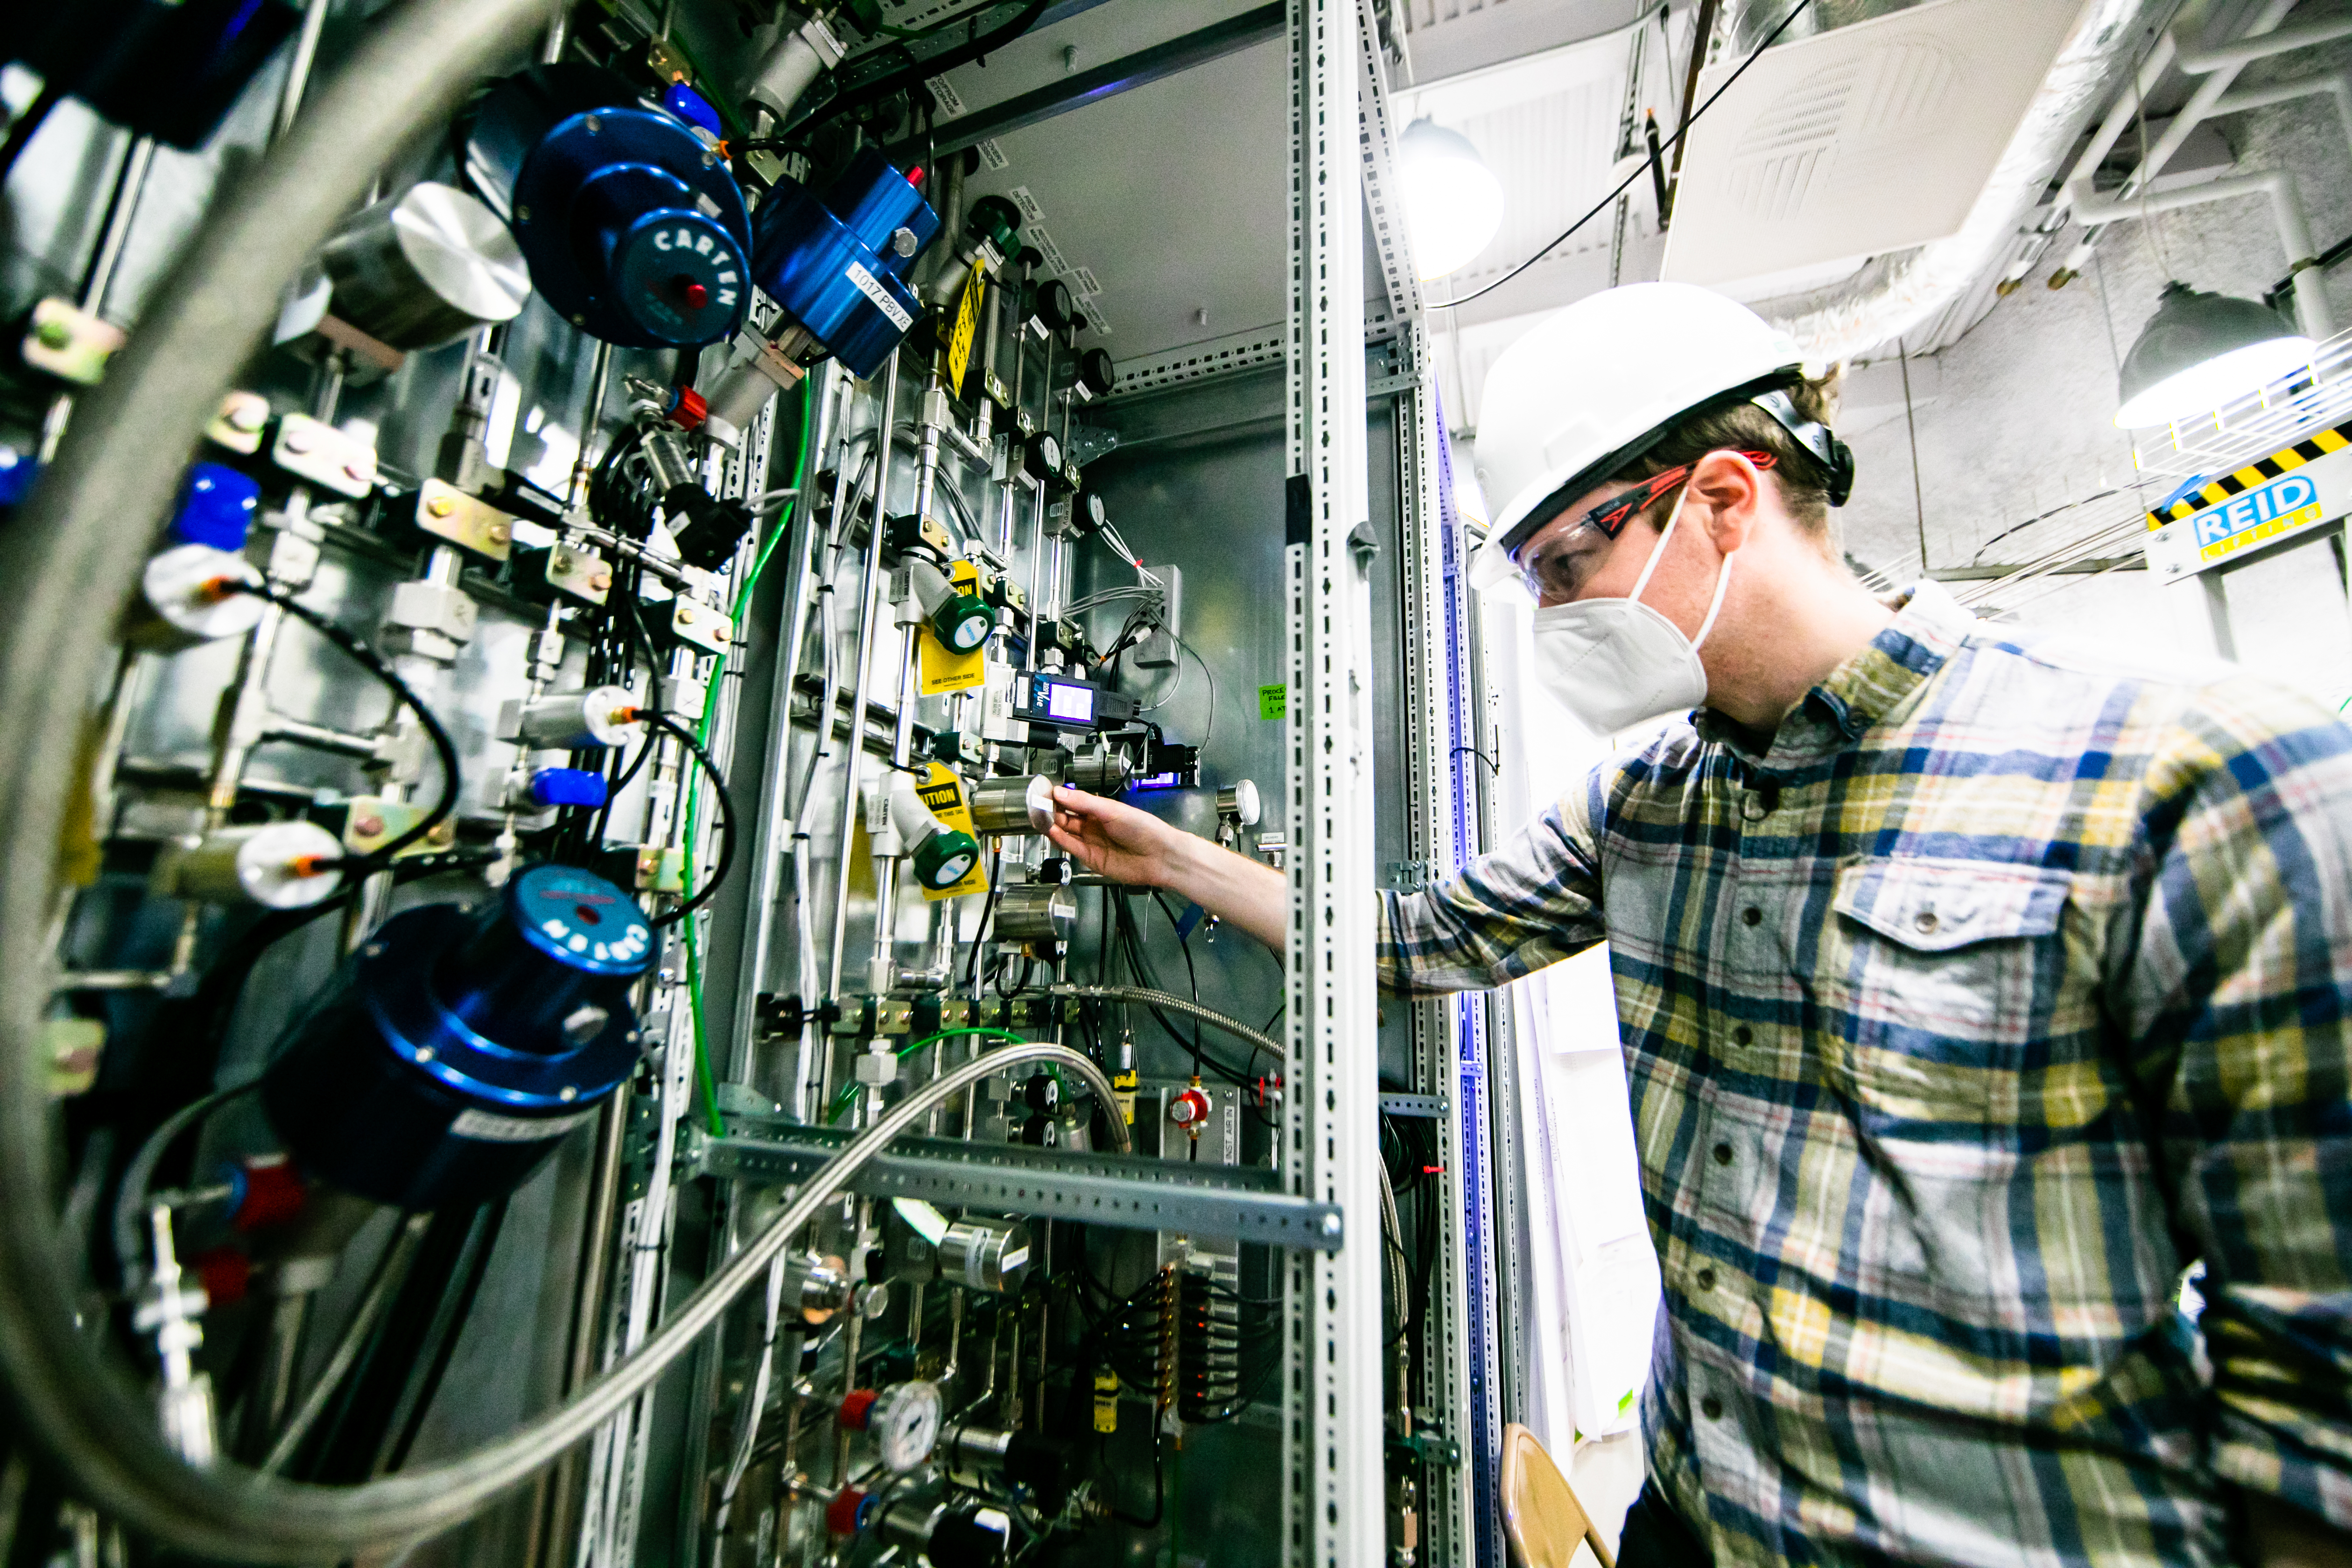 a researcher turns a dial on a complex wall of controls